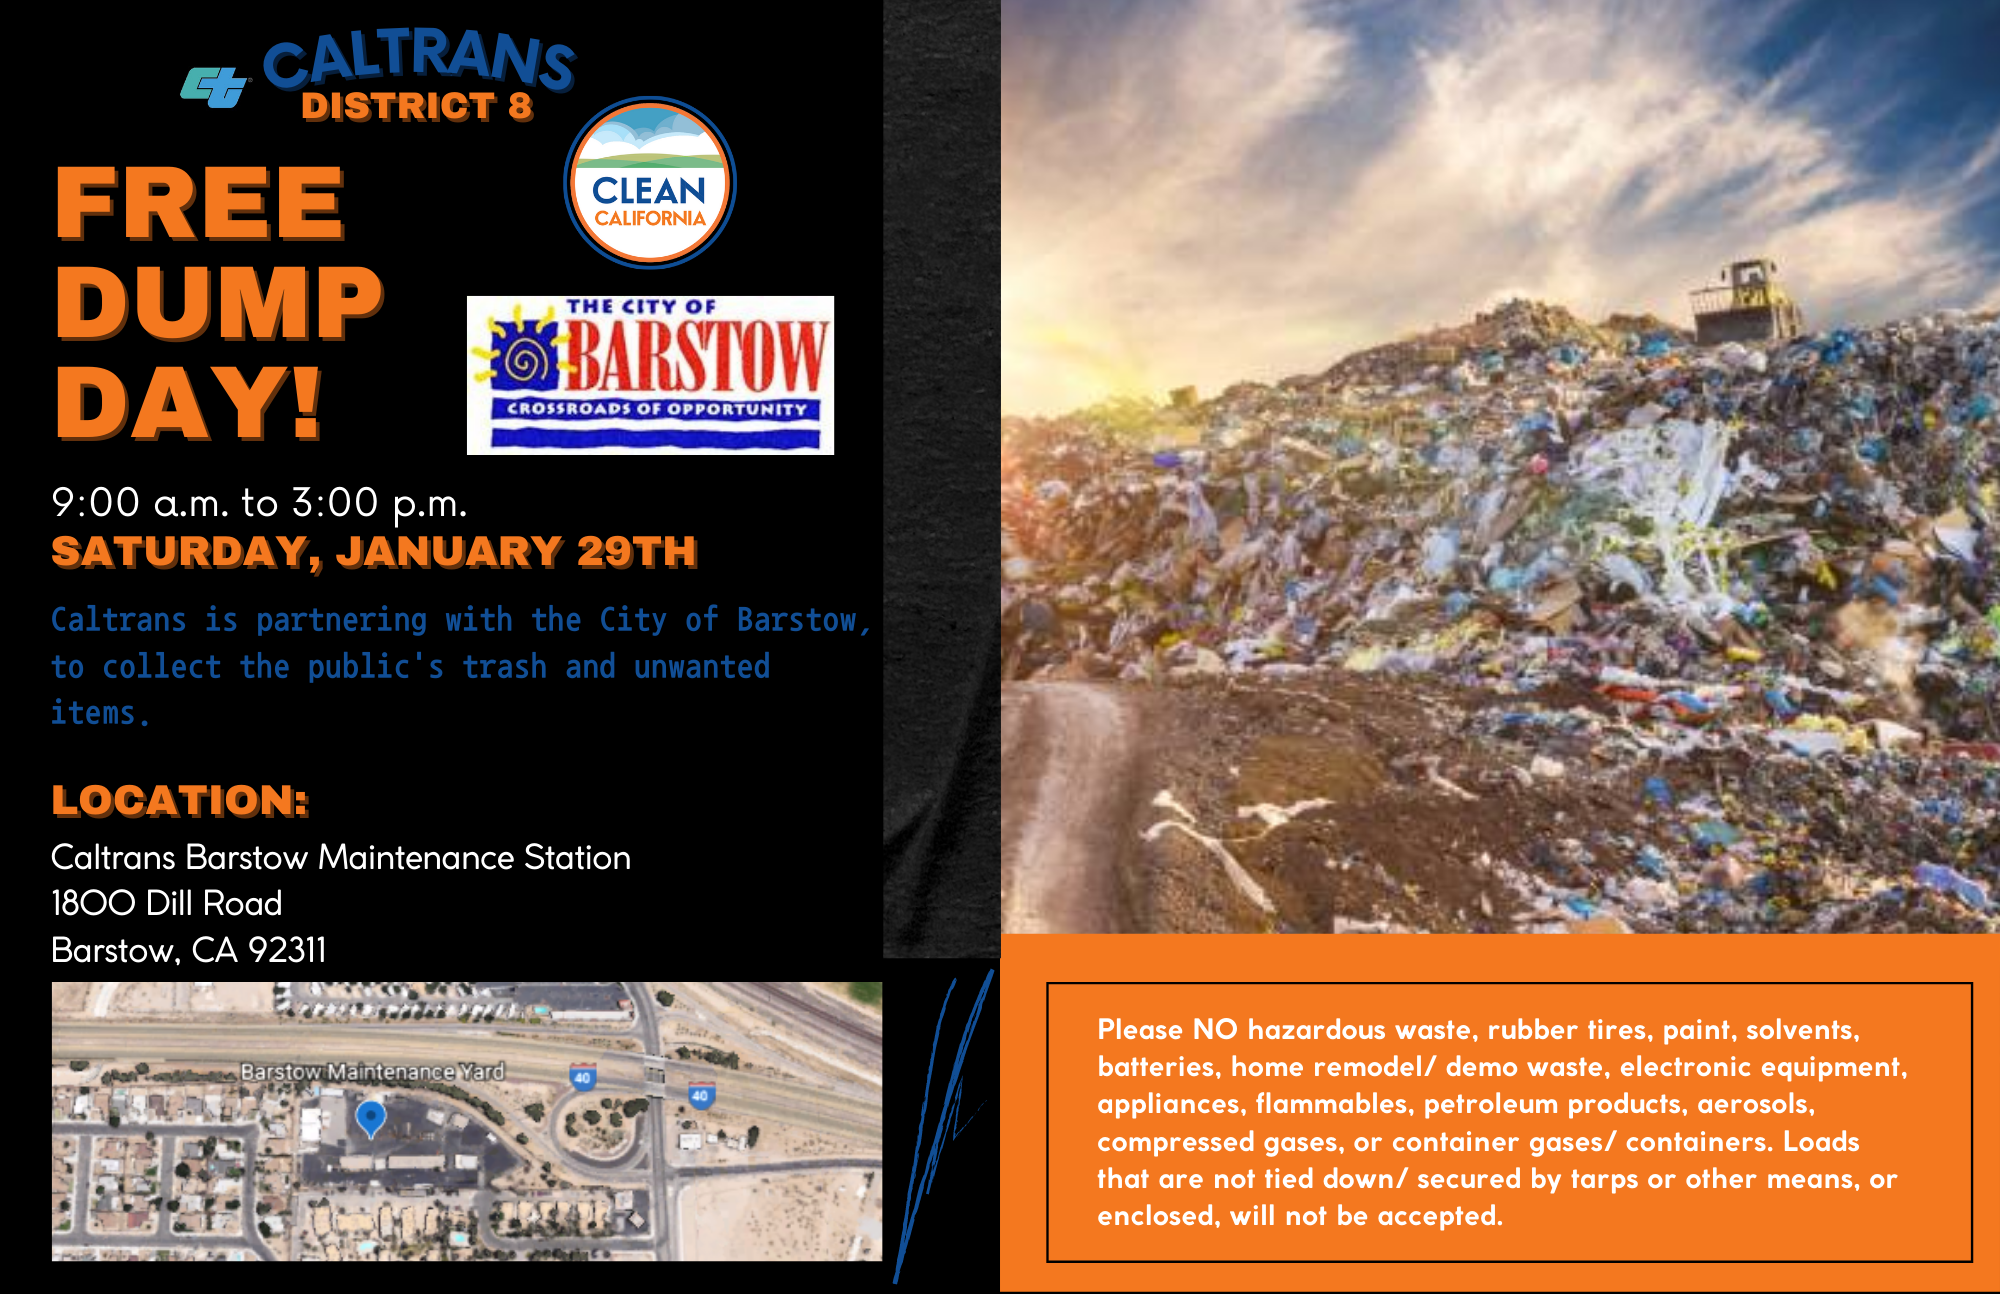 Caltrans District 8 Free dump day! 9:00 am to 3pm Caltrans is partnering with the city of Barstow to collect the public's trash and unwanted items. Location: Caltrans Barstow Maintenance Station 1800 Dill Road Barstow, CA 92311